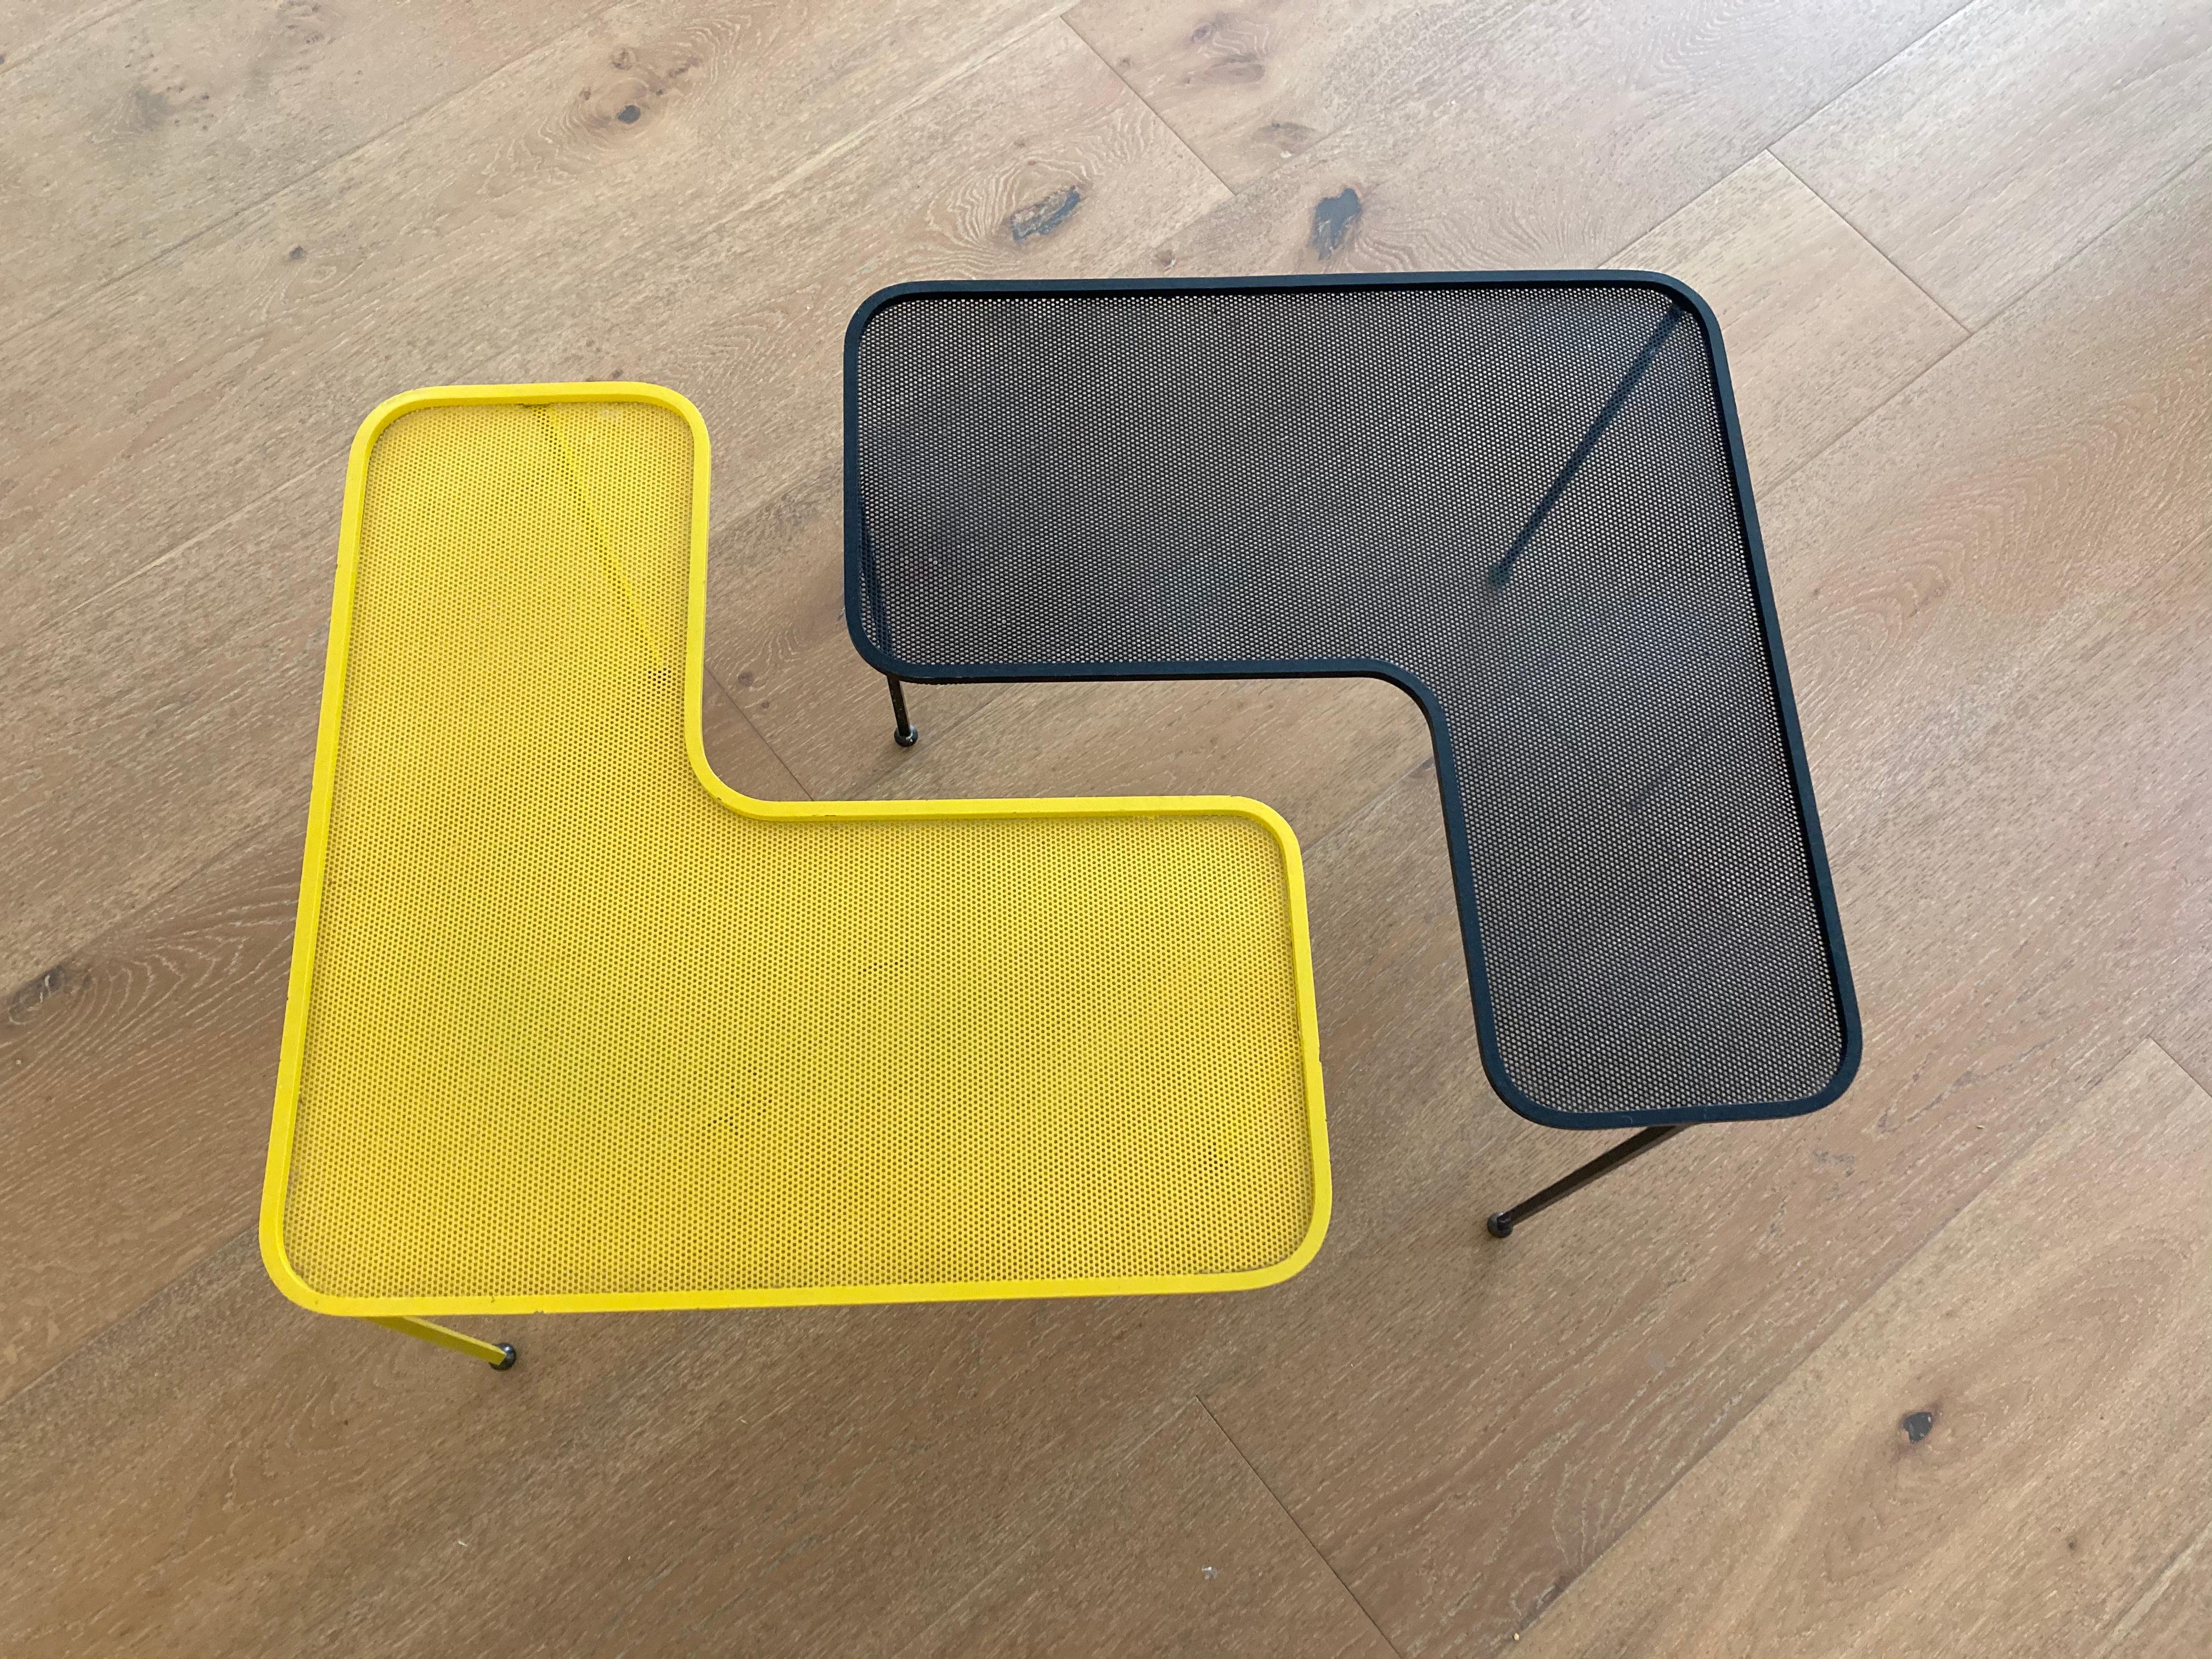 Pair of Domino coffee tables by Mathieu Matégot. Black and yellow, lacquered perforated metal and brass.